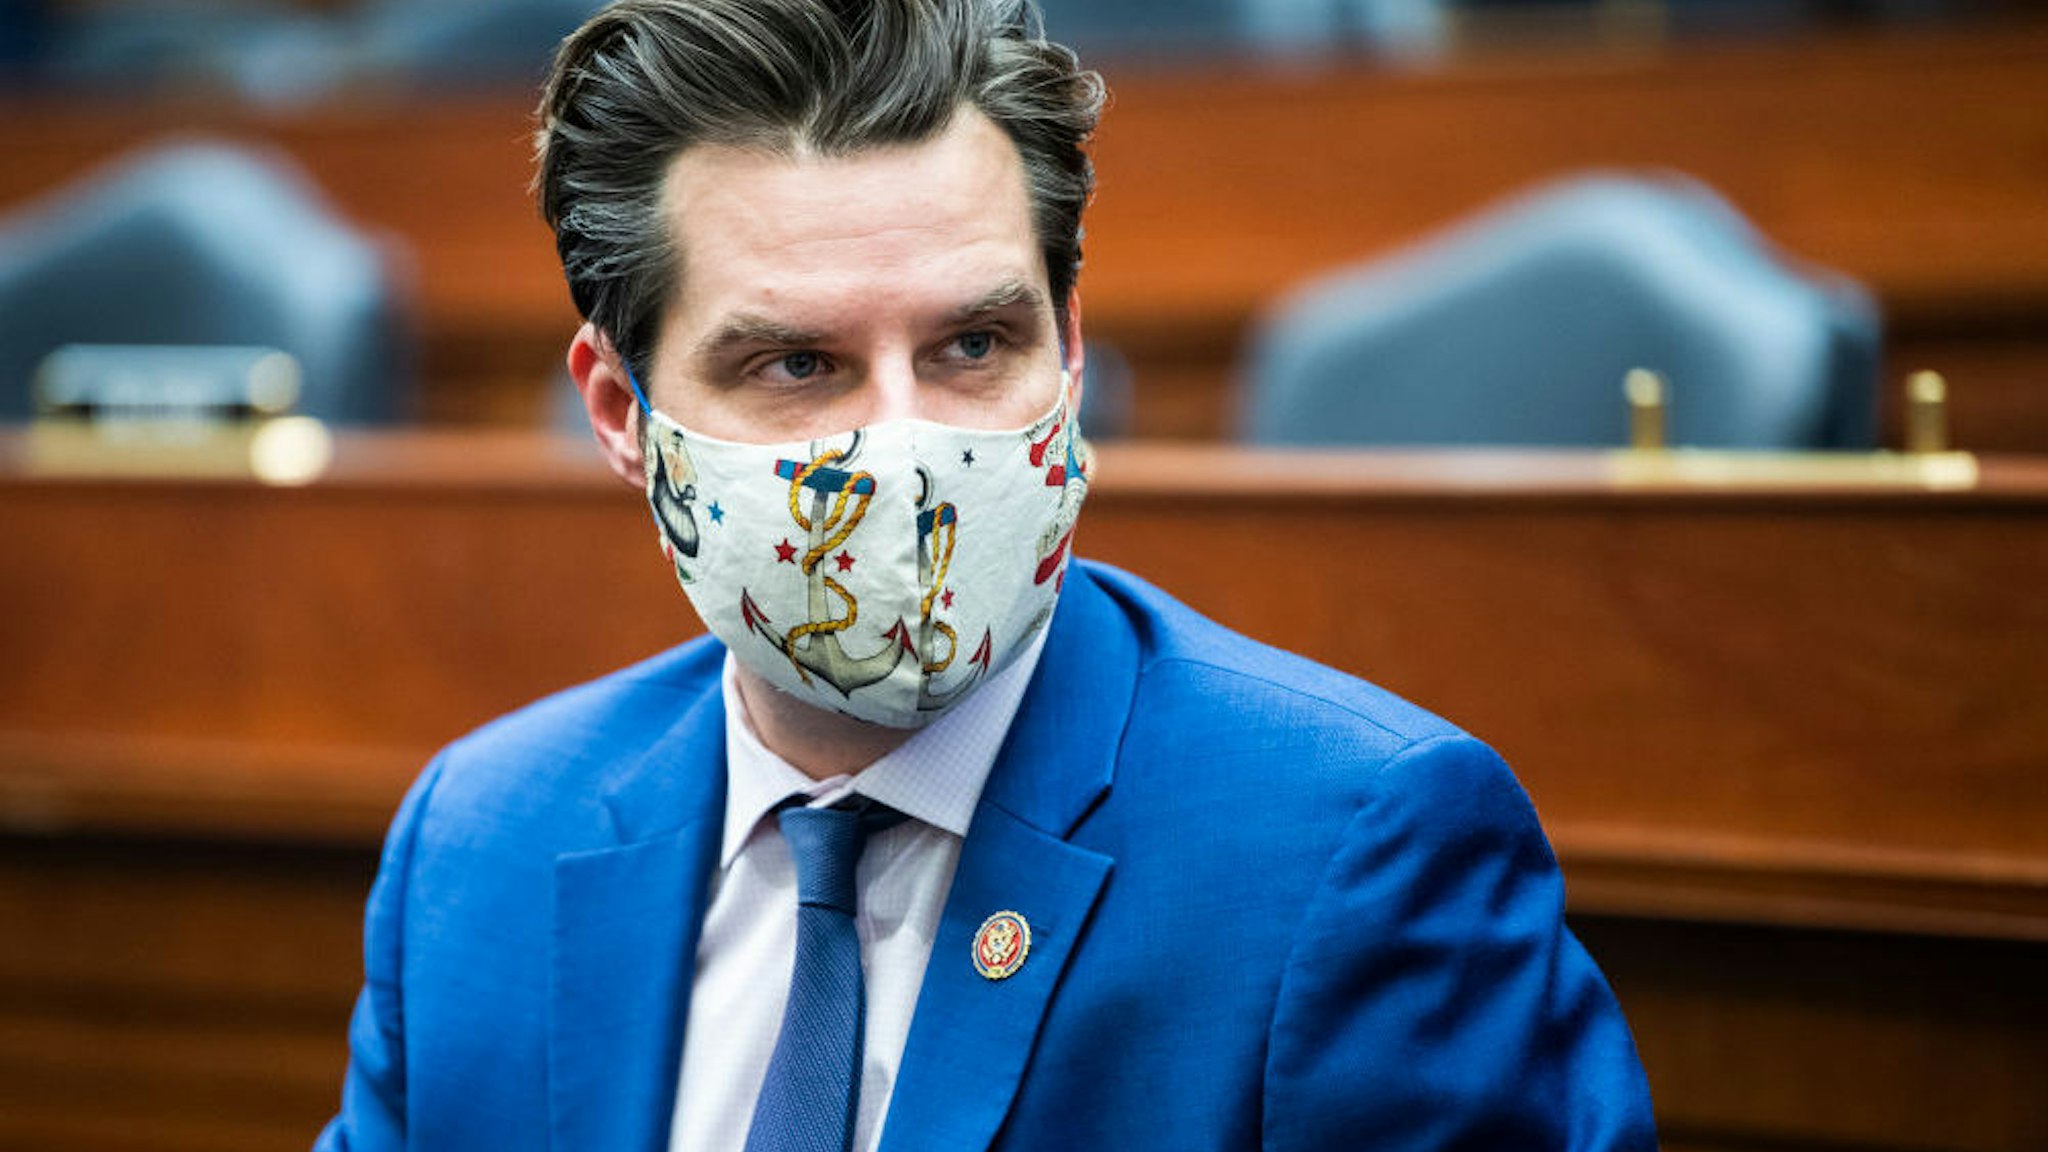 UNITED STATES - FEBRUARY 3: Rep. Matt Gaetz, R-Fla., is seen during the House Armed Services Committee meeting to organize for the 117th Congress in Rayburn Building on Wednesday, February 3, 2021.